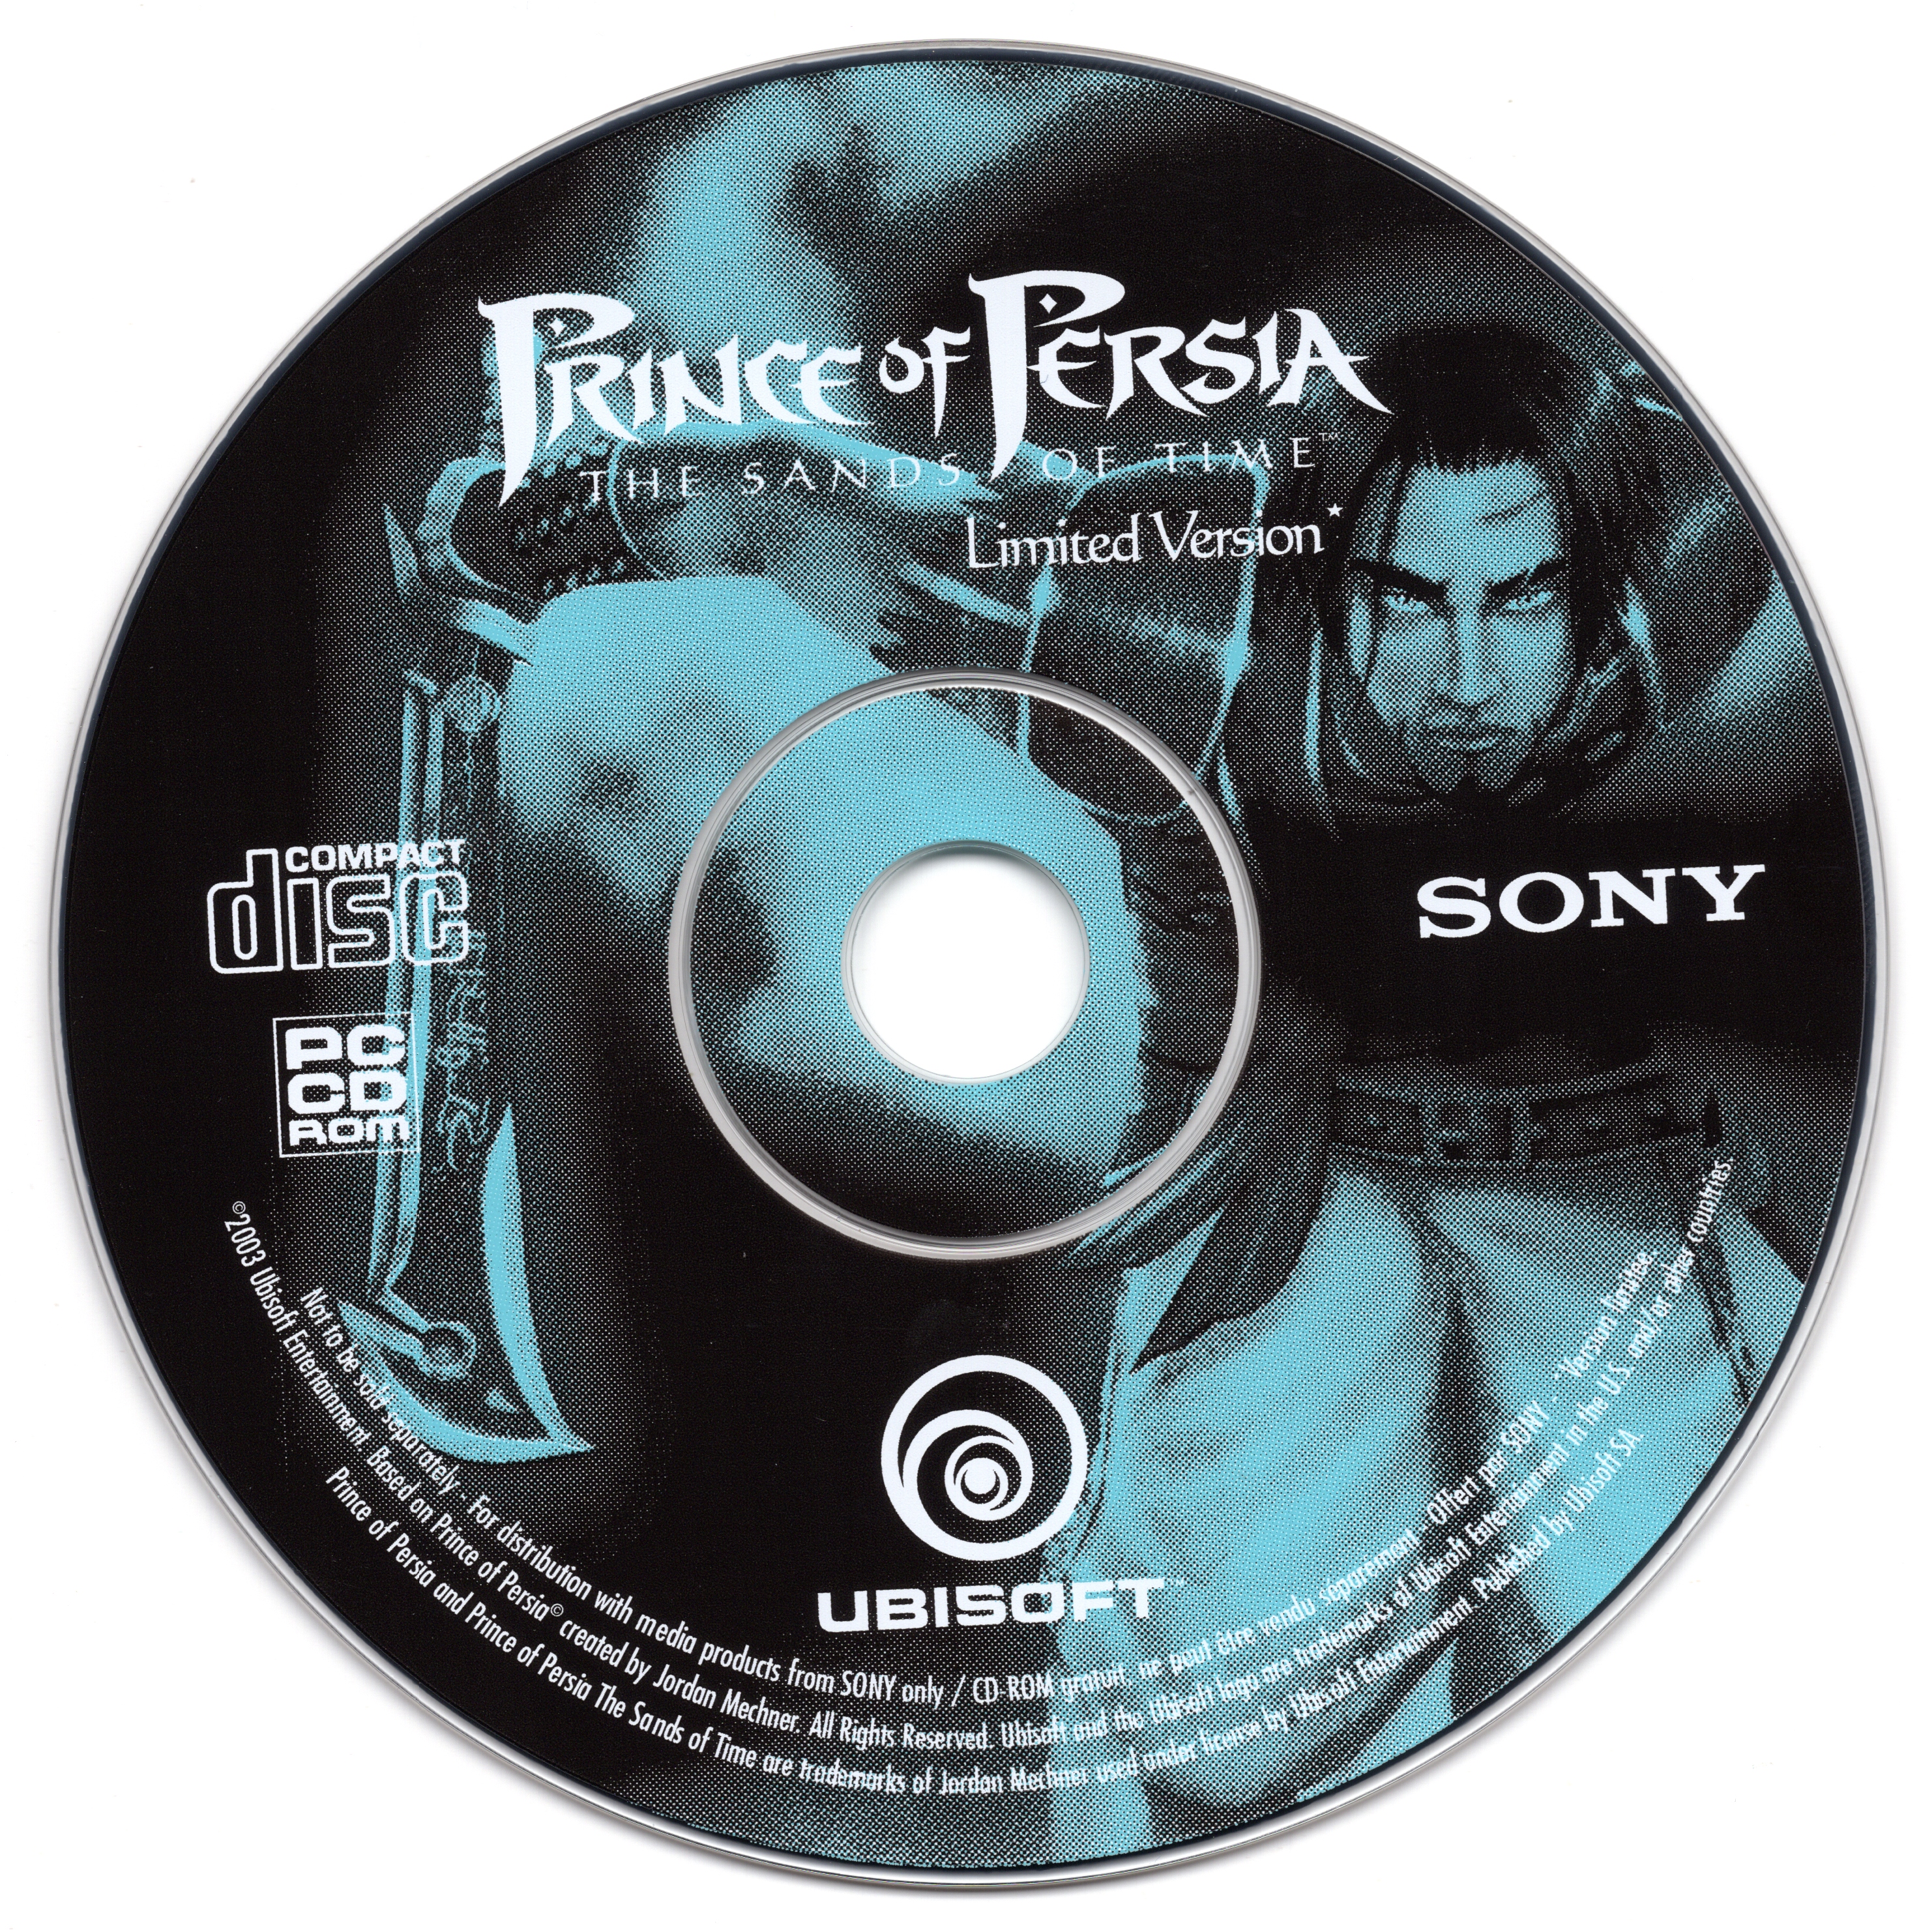 PC CD-ROM PRINCE OF PERSIA THE SAND OF TIME 12 UBISOFT EXCLUSIVE IN ITALIANO 